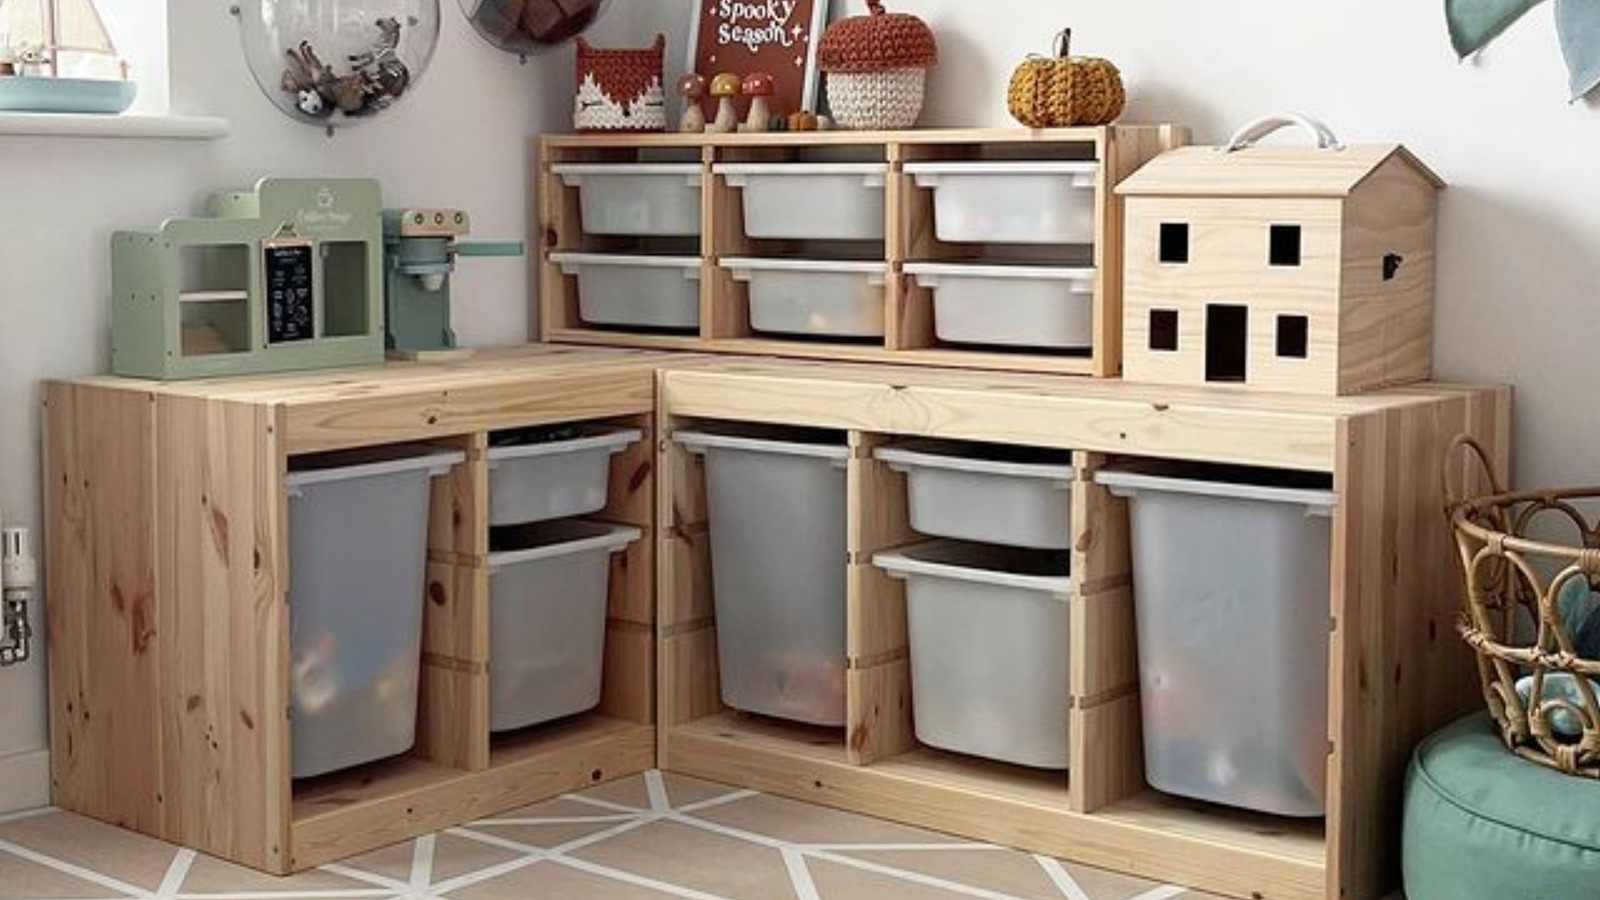 Make Your IKEA Trofast Work In Any Room With These Creative DIY Upcycles